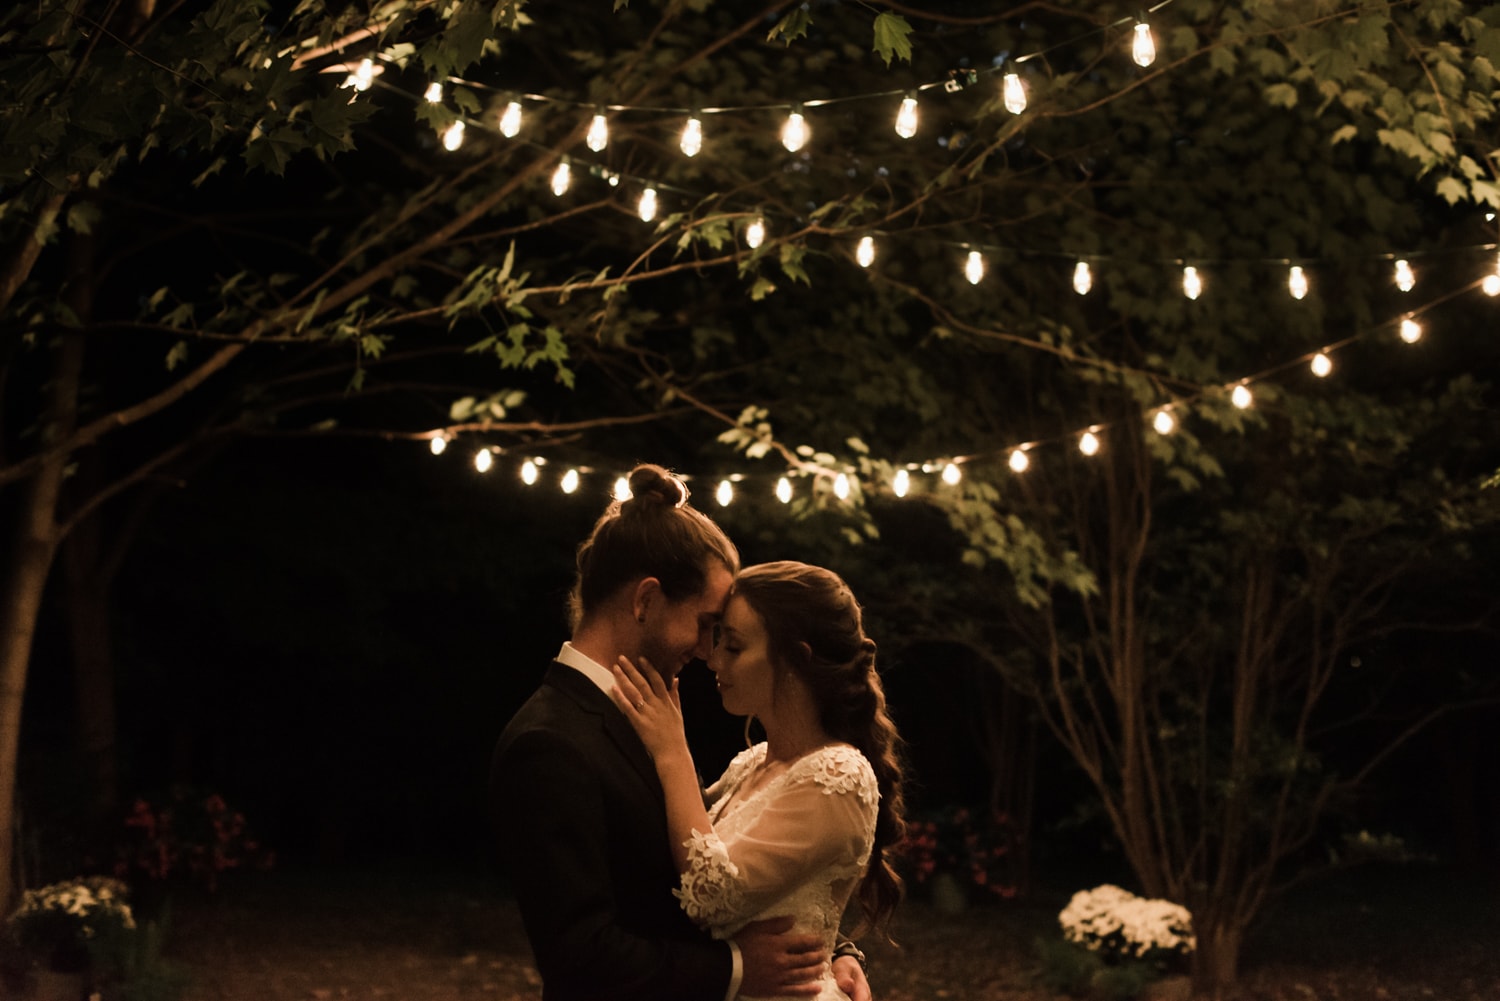 A bride and groom embrace underneath string lights after their intimate wedding in a forest.